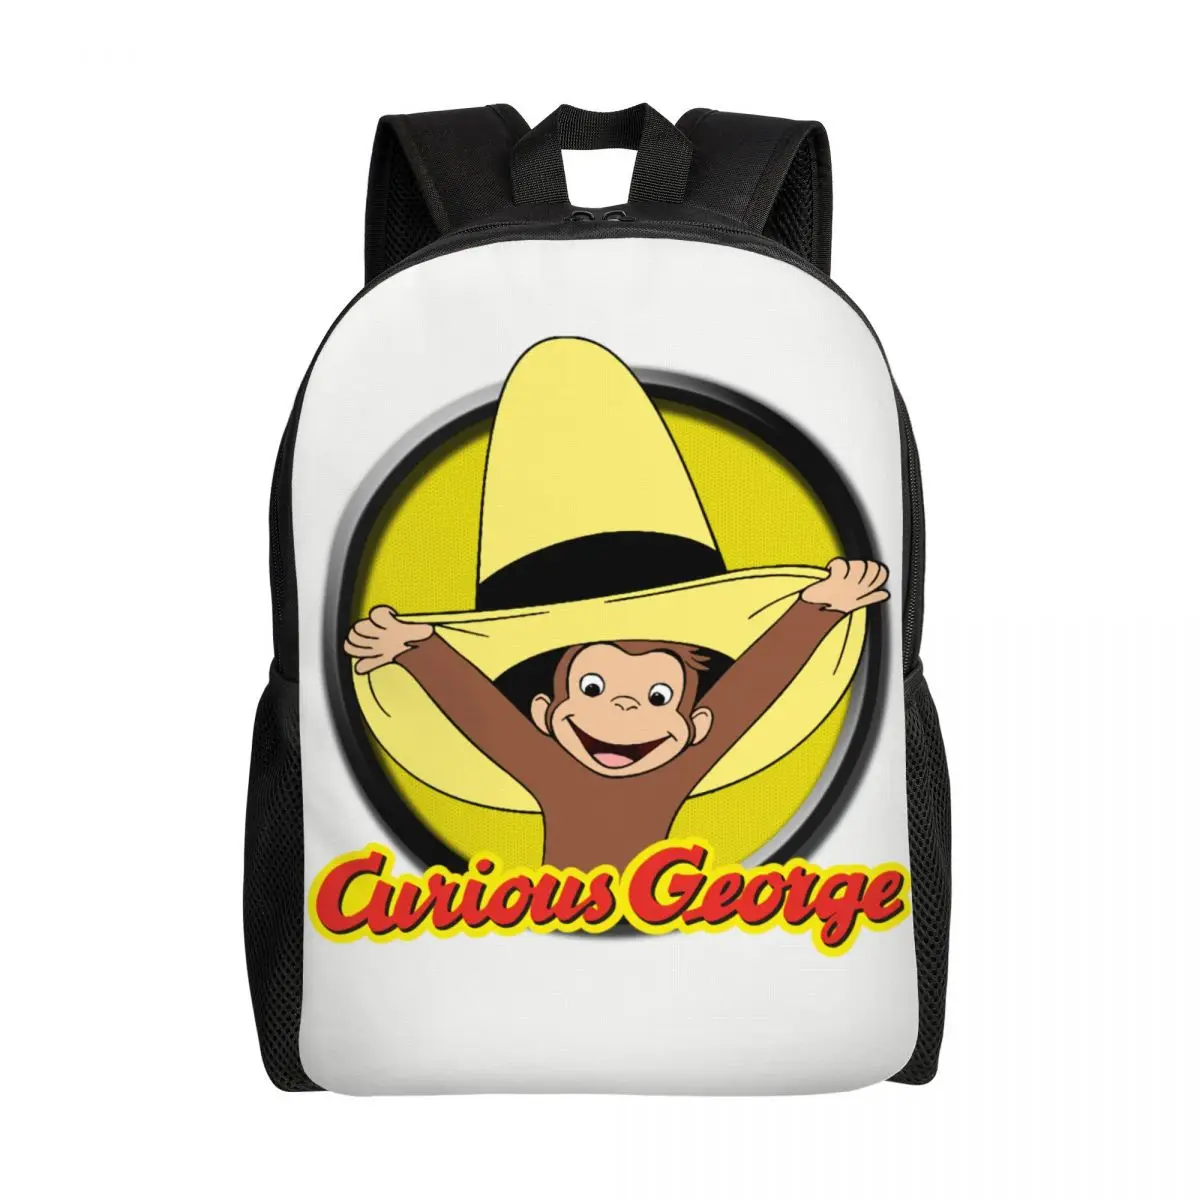 

Curious George Cute Funny Backpack for Women Men School College Students Bookbag Fits 15 Inch Laptop Brown Monkey Bags